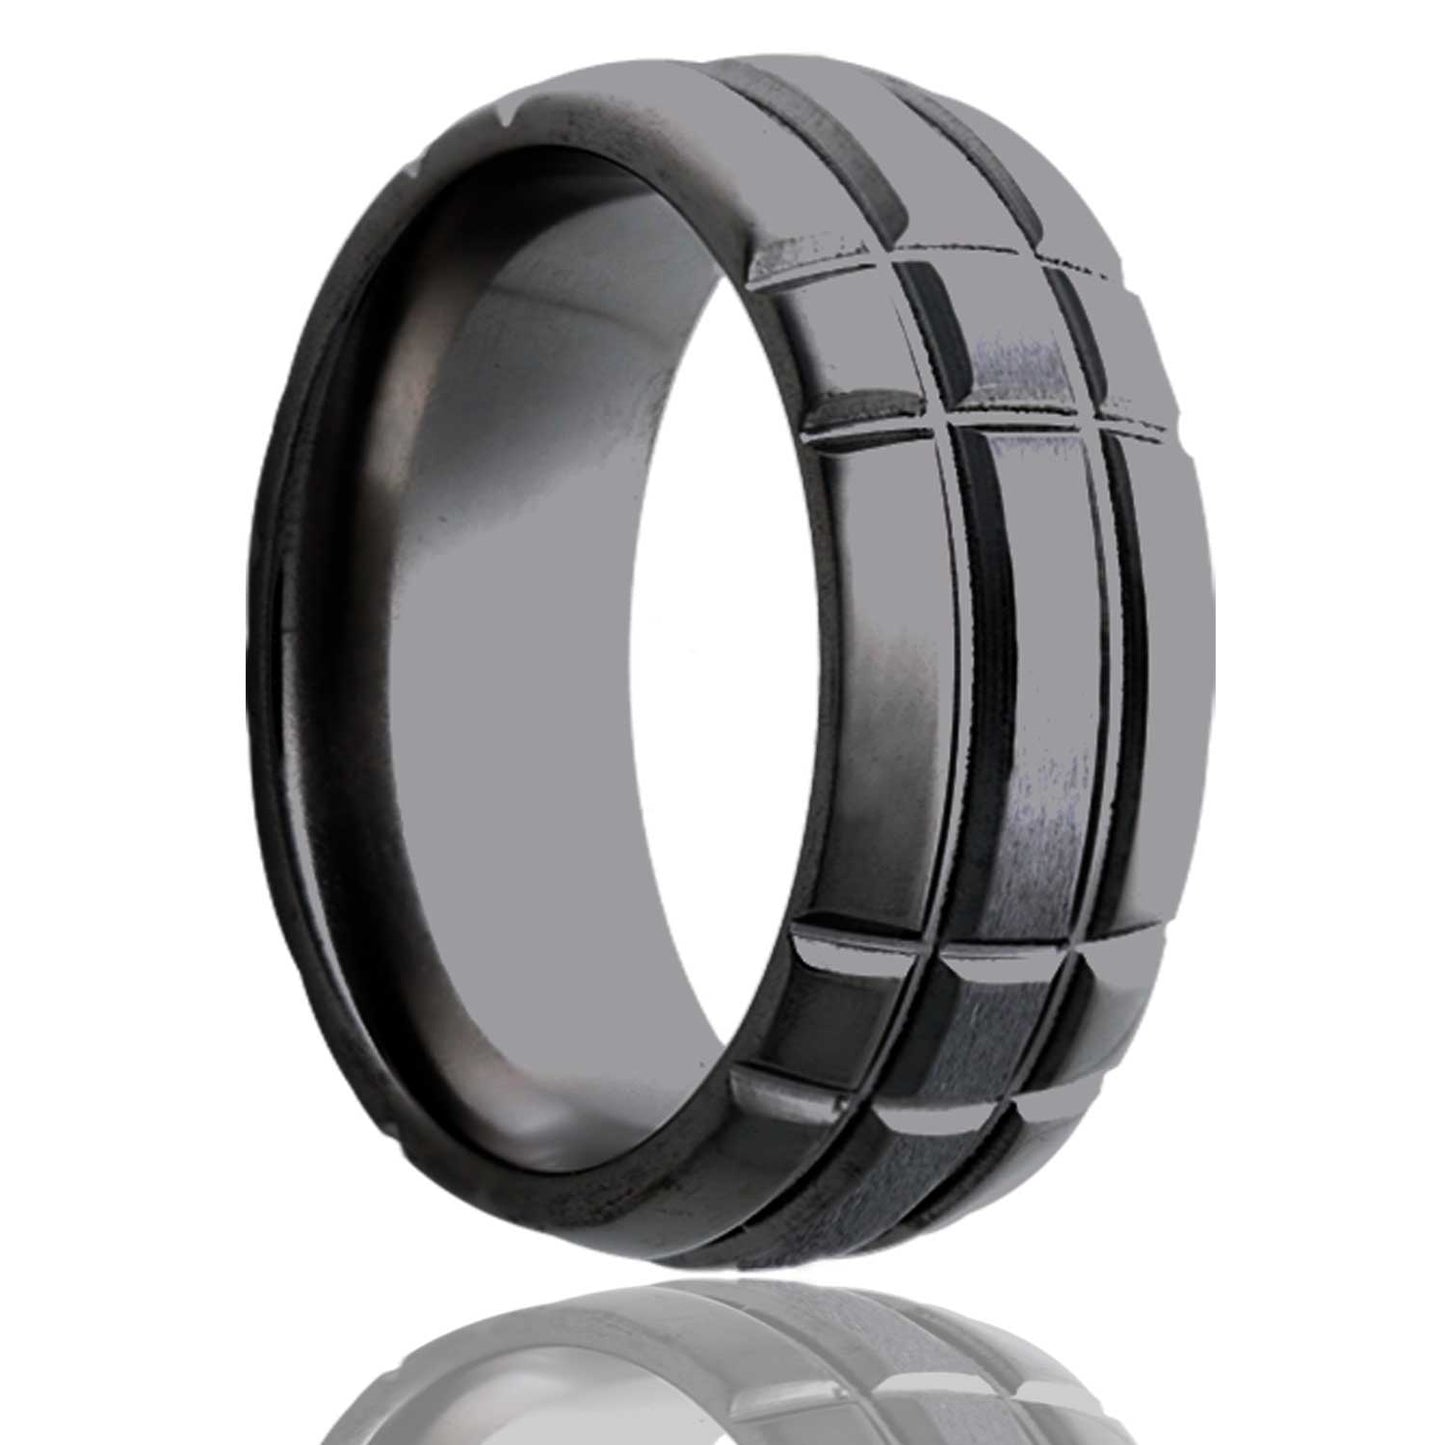 A intersecting grooves domed satin finish zirconium men's wedding band displayed on a neutral white background.